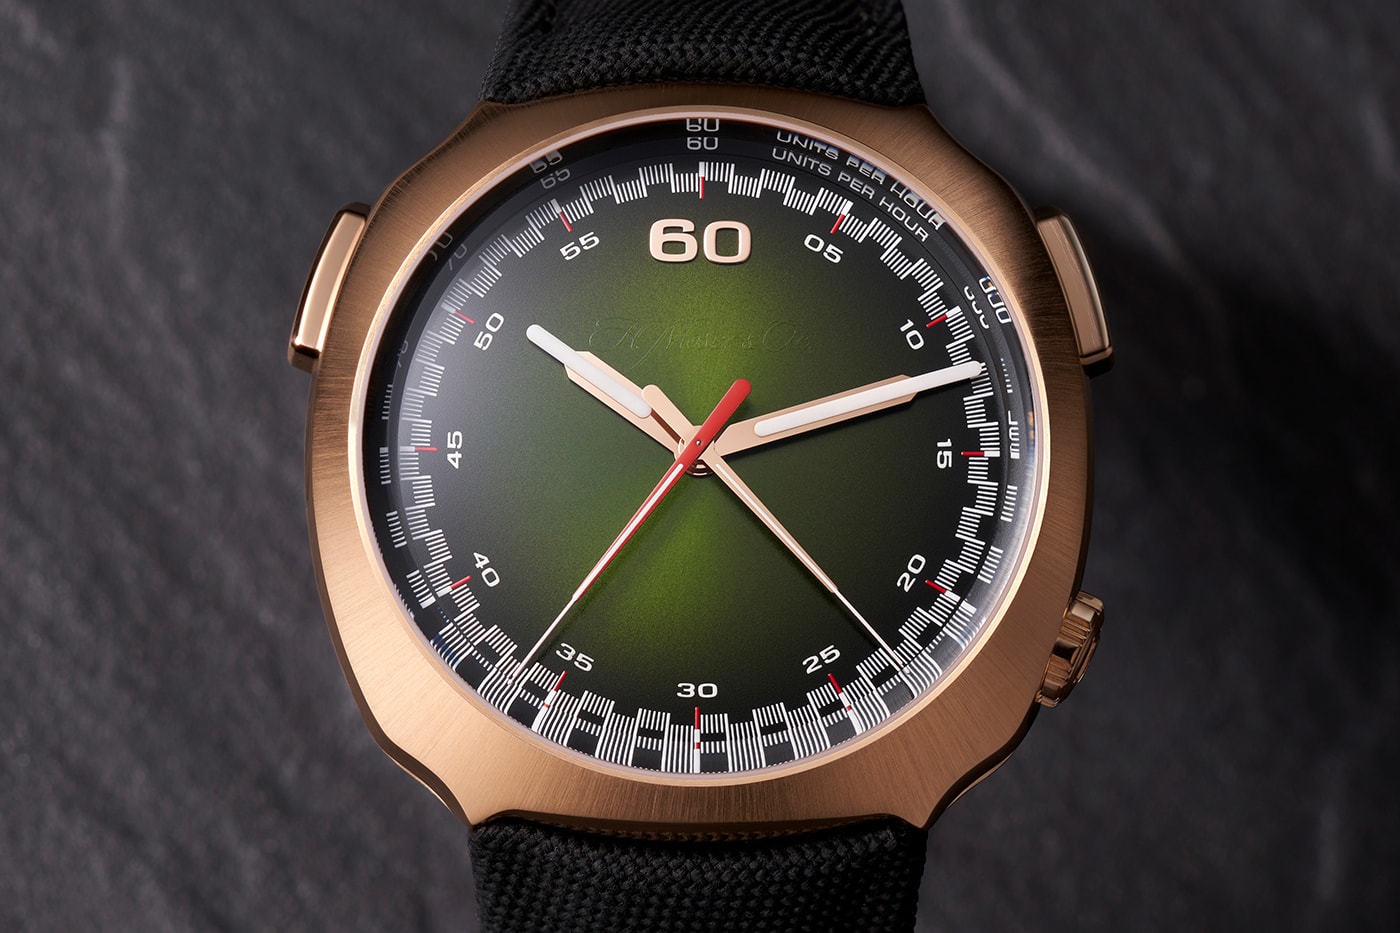 H. Moser & Cie Streamliner Flyback Chronograph Automatic Boutique Edition